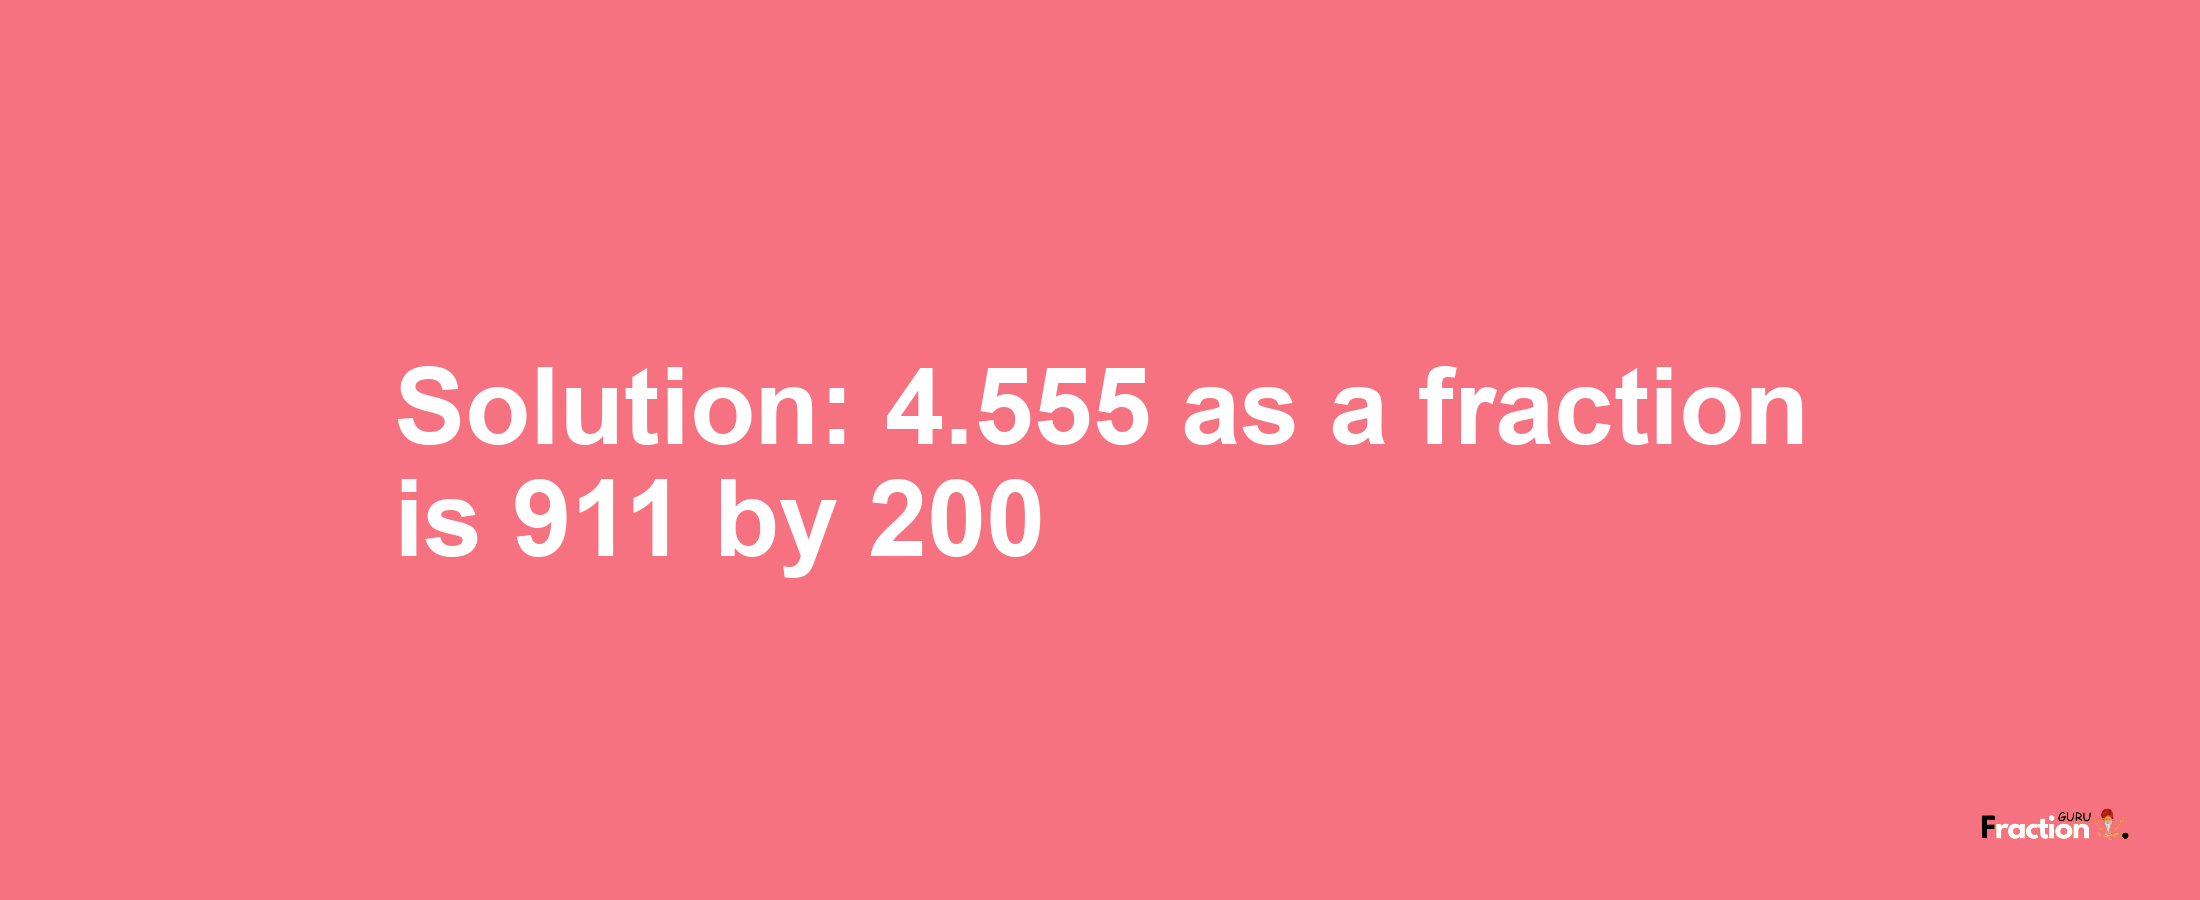 Solution:4.555 as a fraction is 911/200